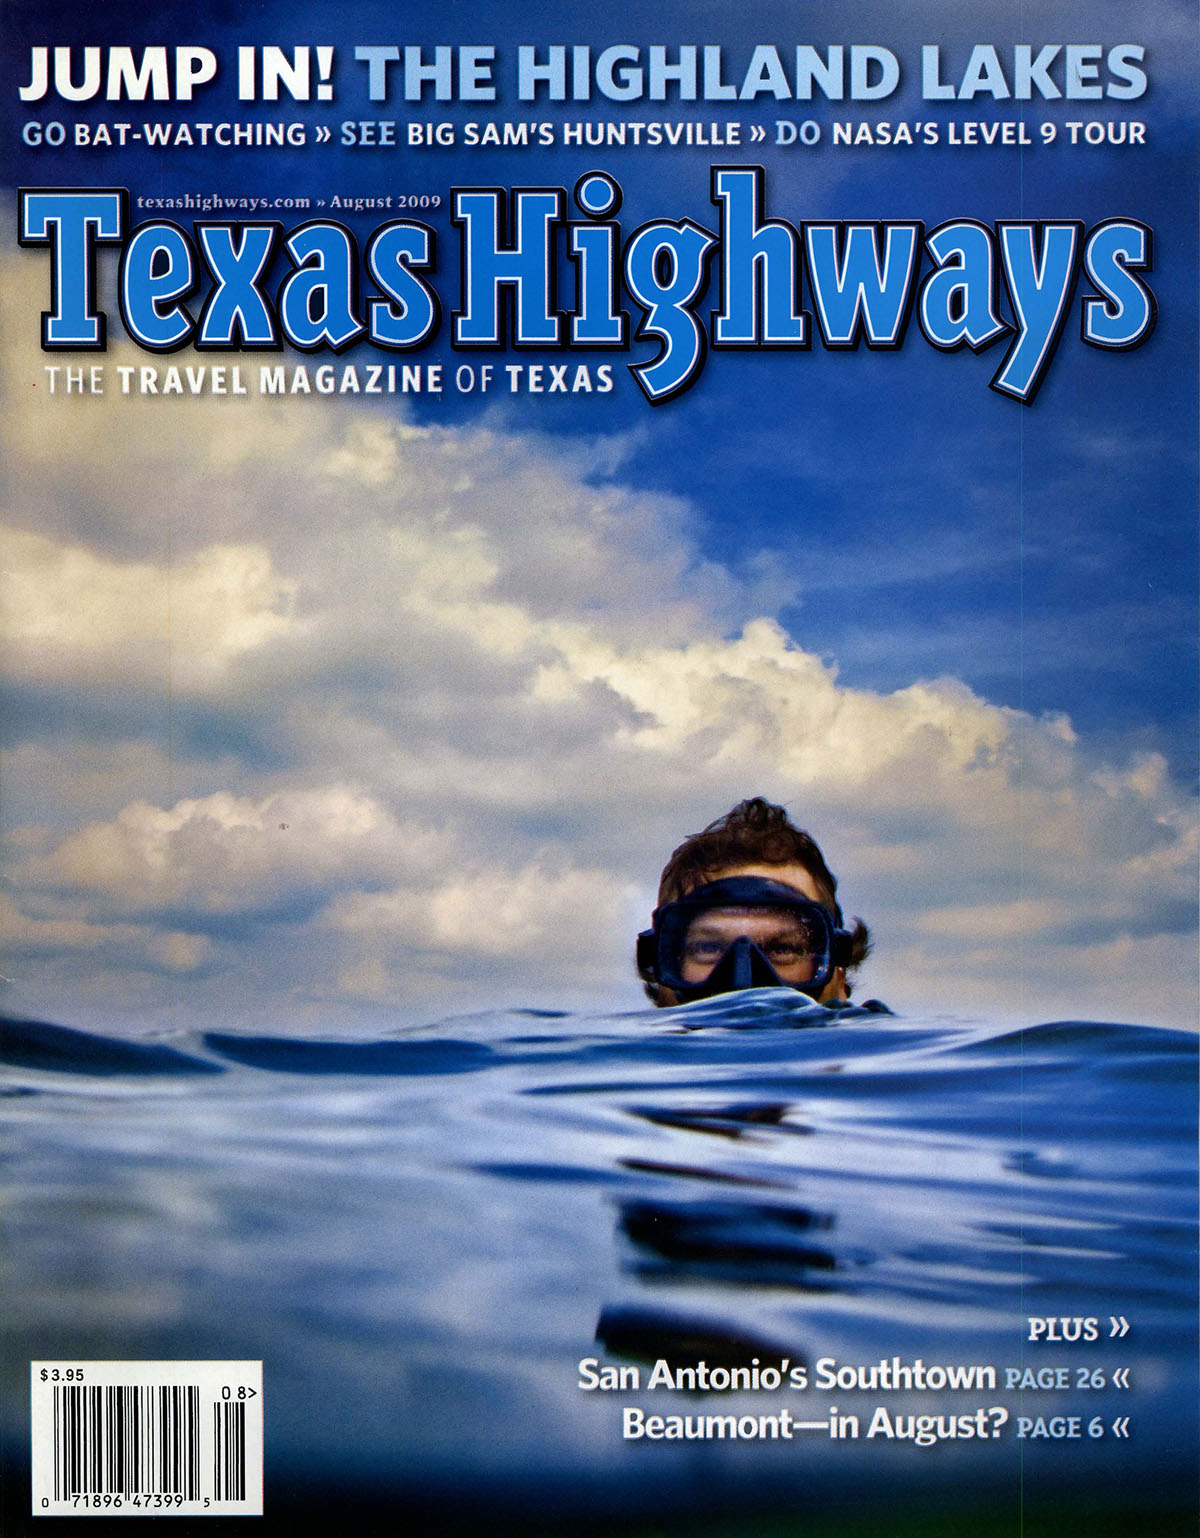 The August 2009 Cover of Texas Highways Magazine